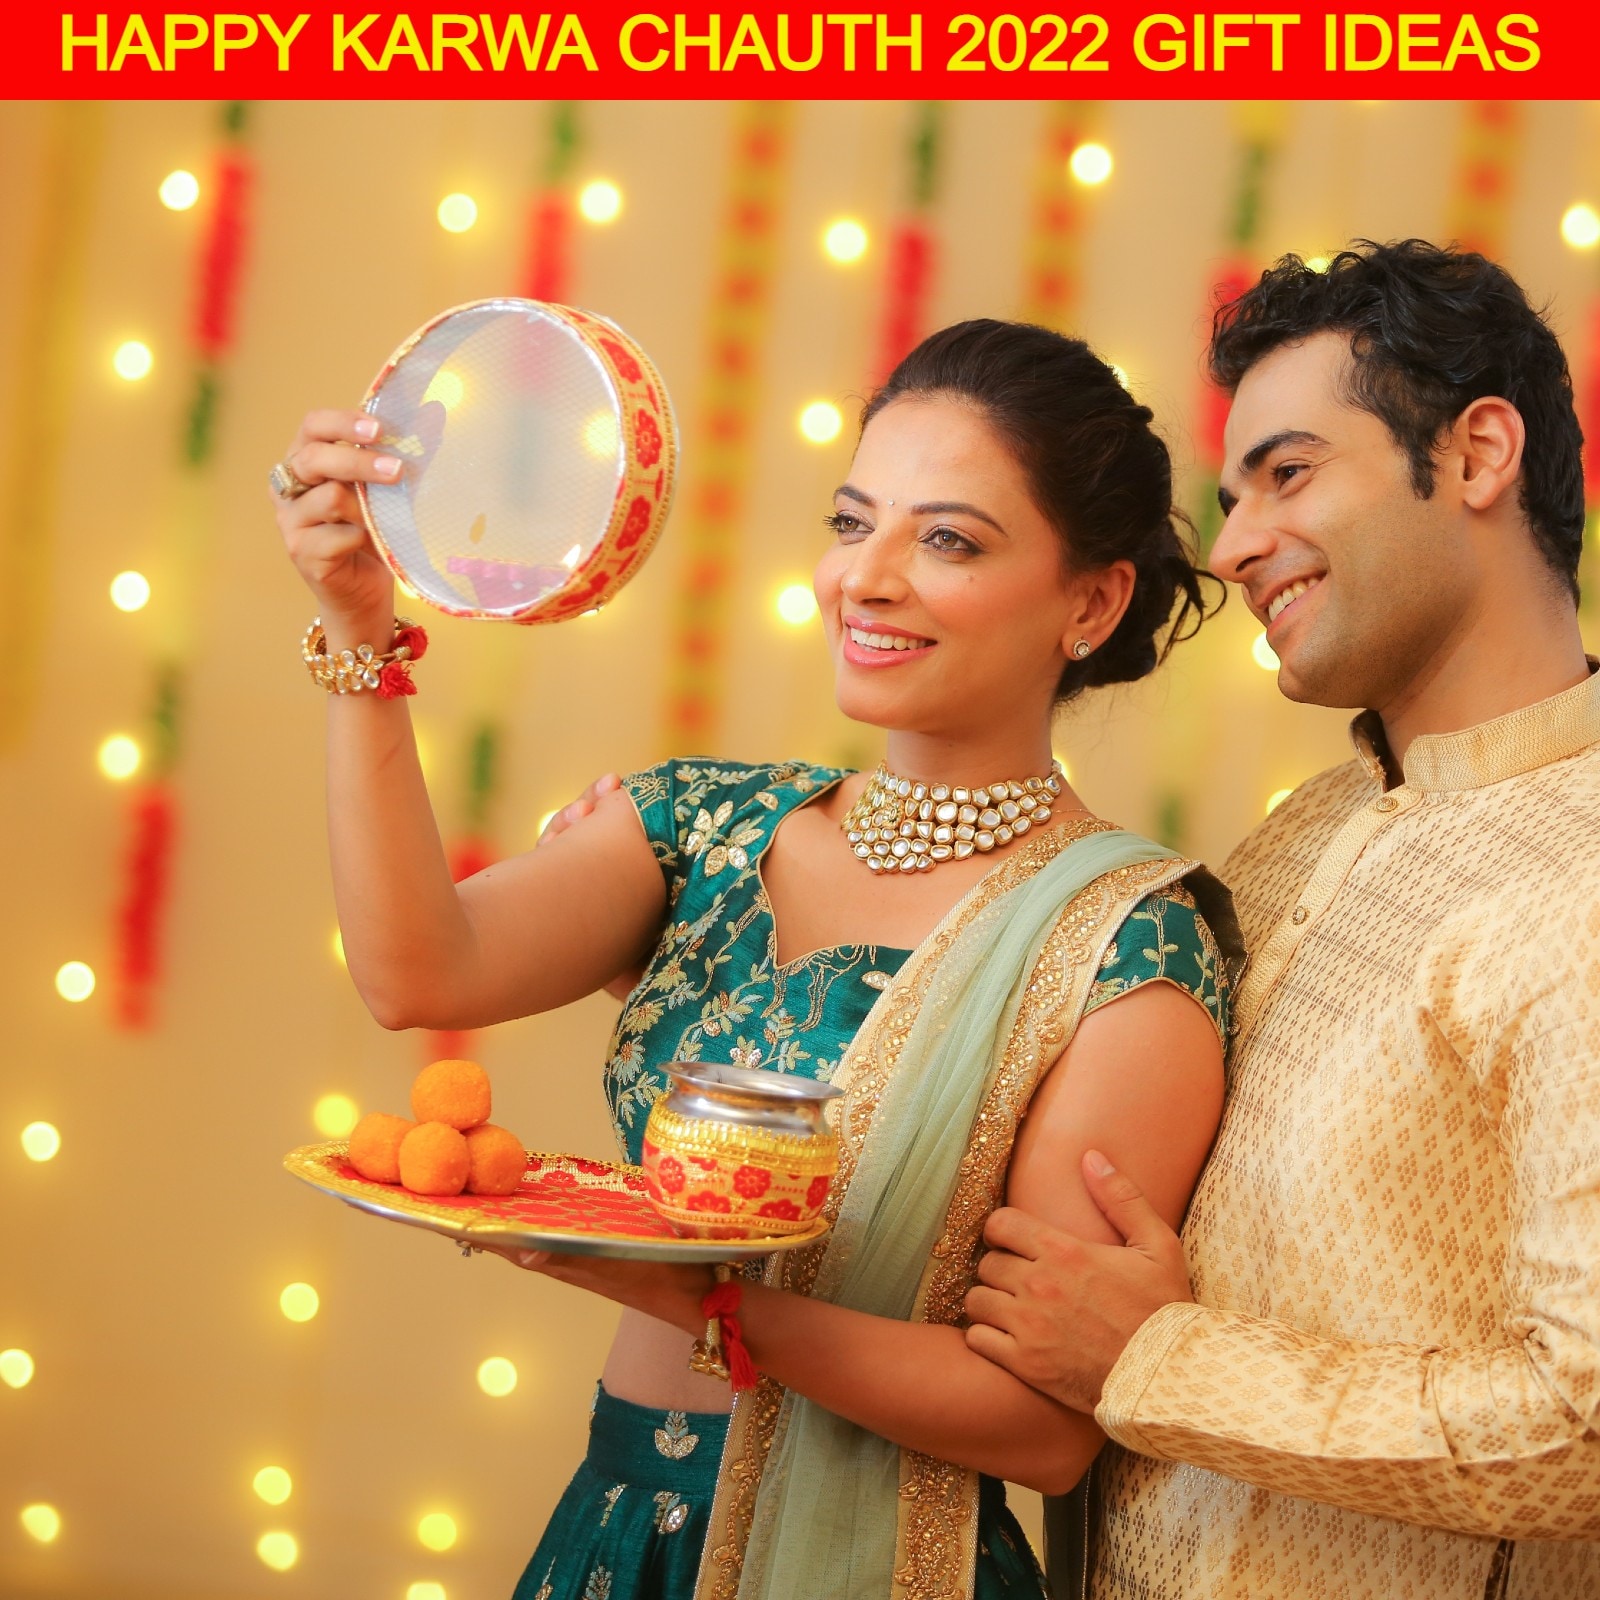 Buy Piccante Red Karwa Chauth Thali Cover Online in India - karvachauth